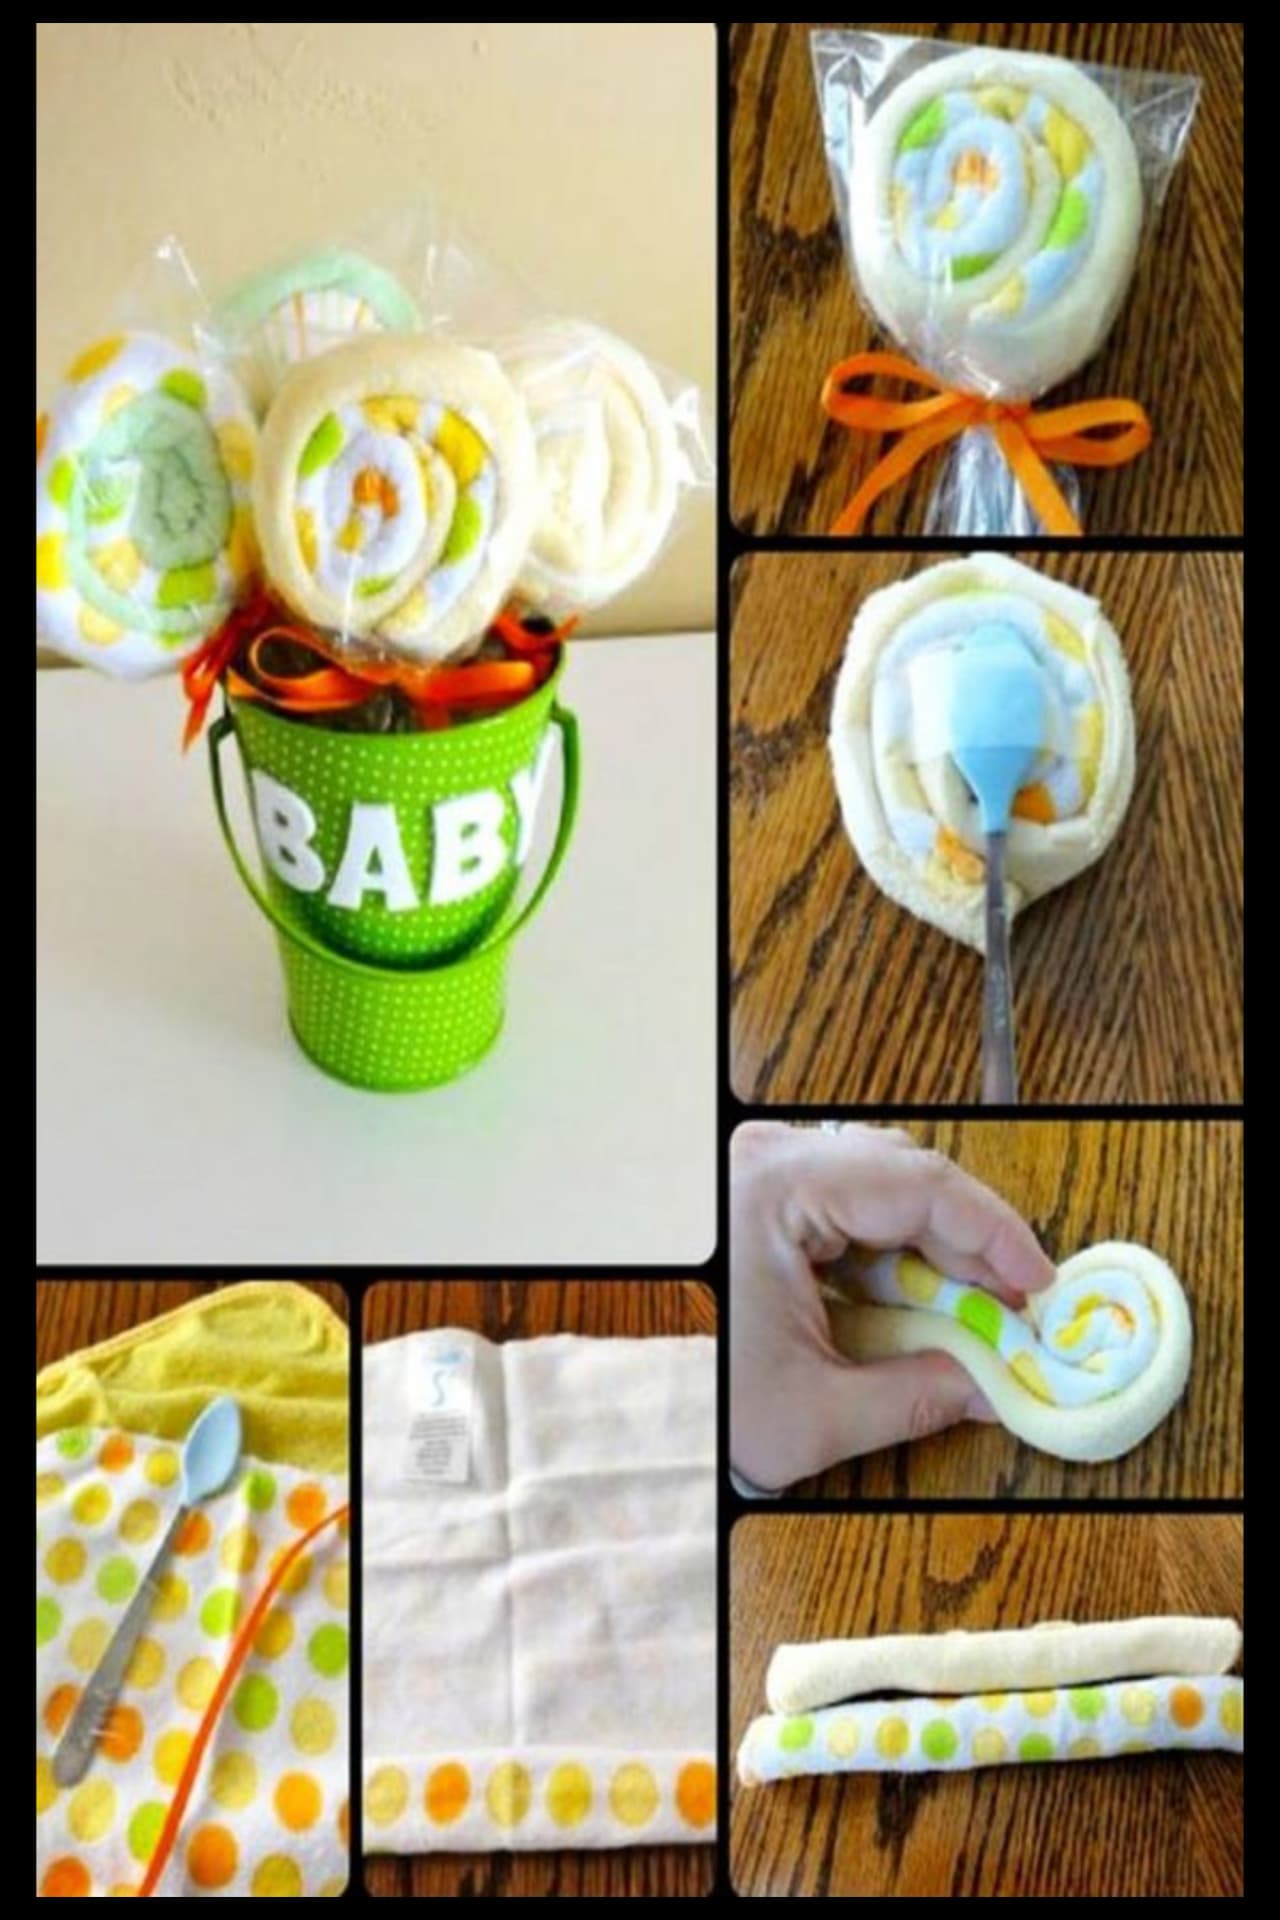 Baby shower gift ideas - super simple baby shower gifts to make - unique baby shower gift ideas on a budget